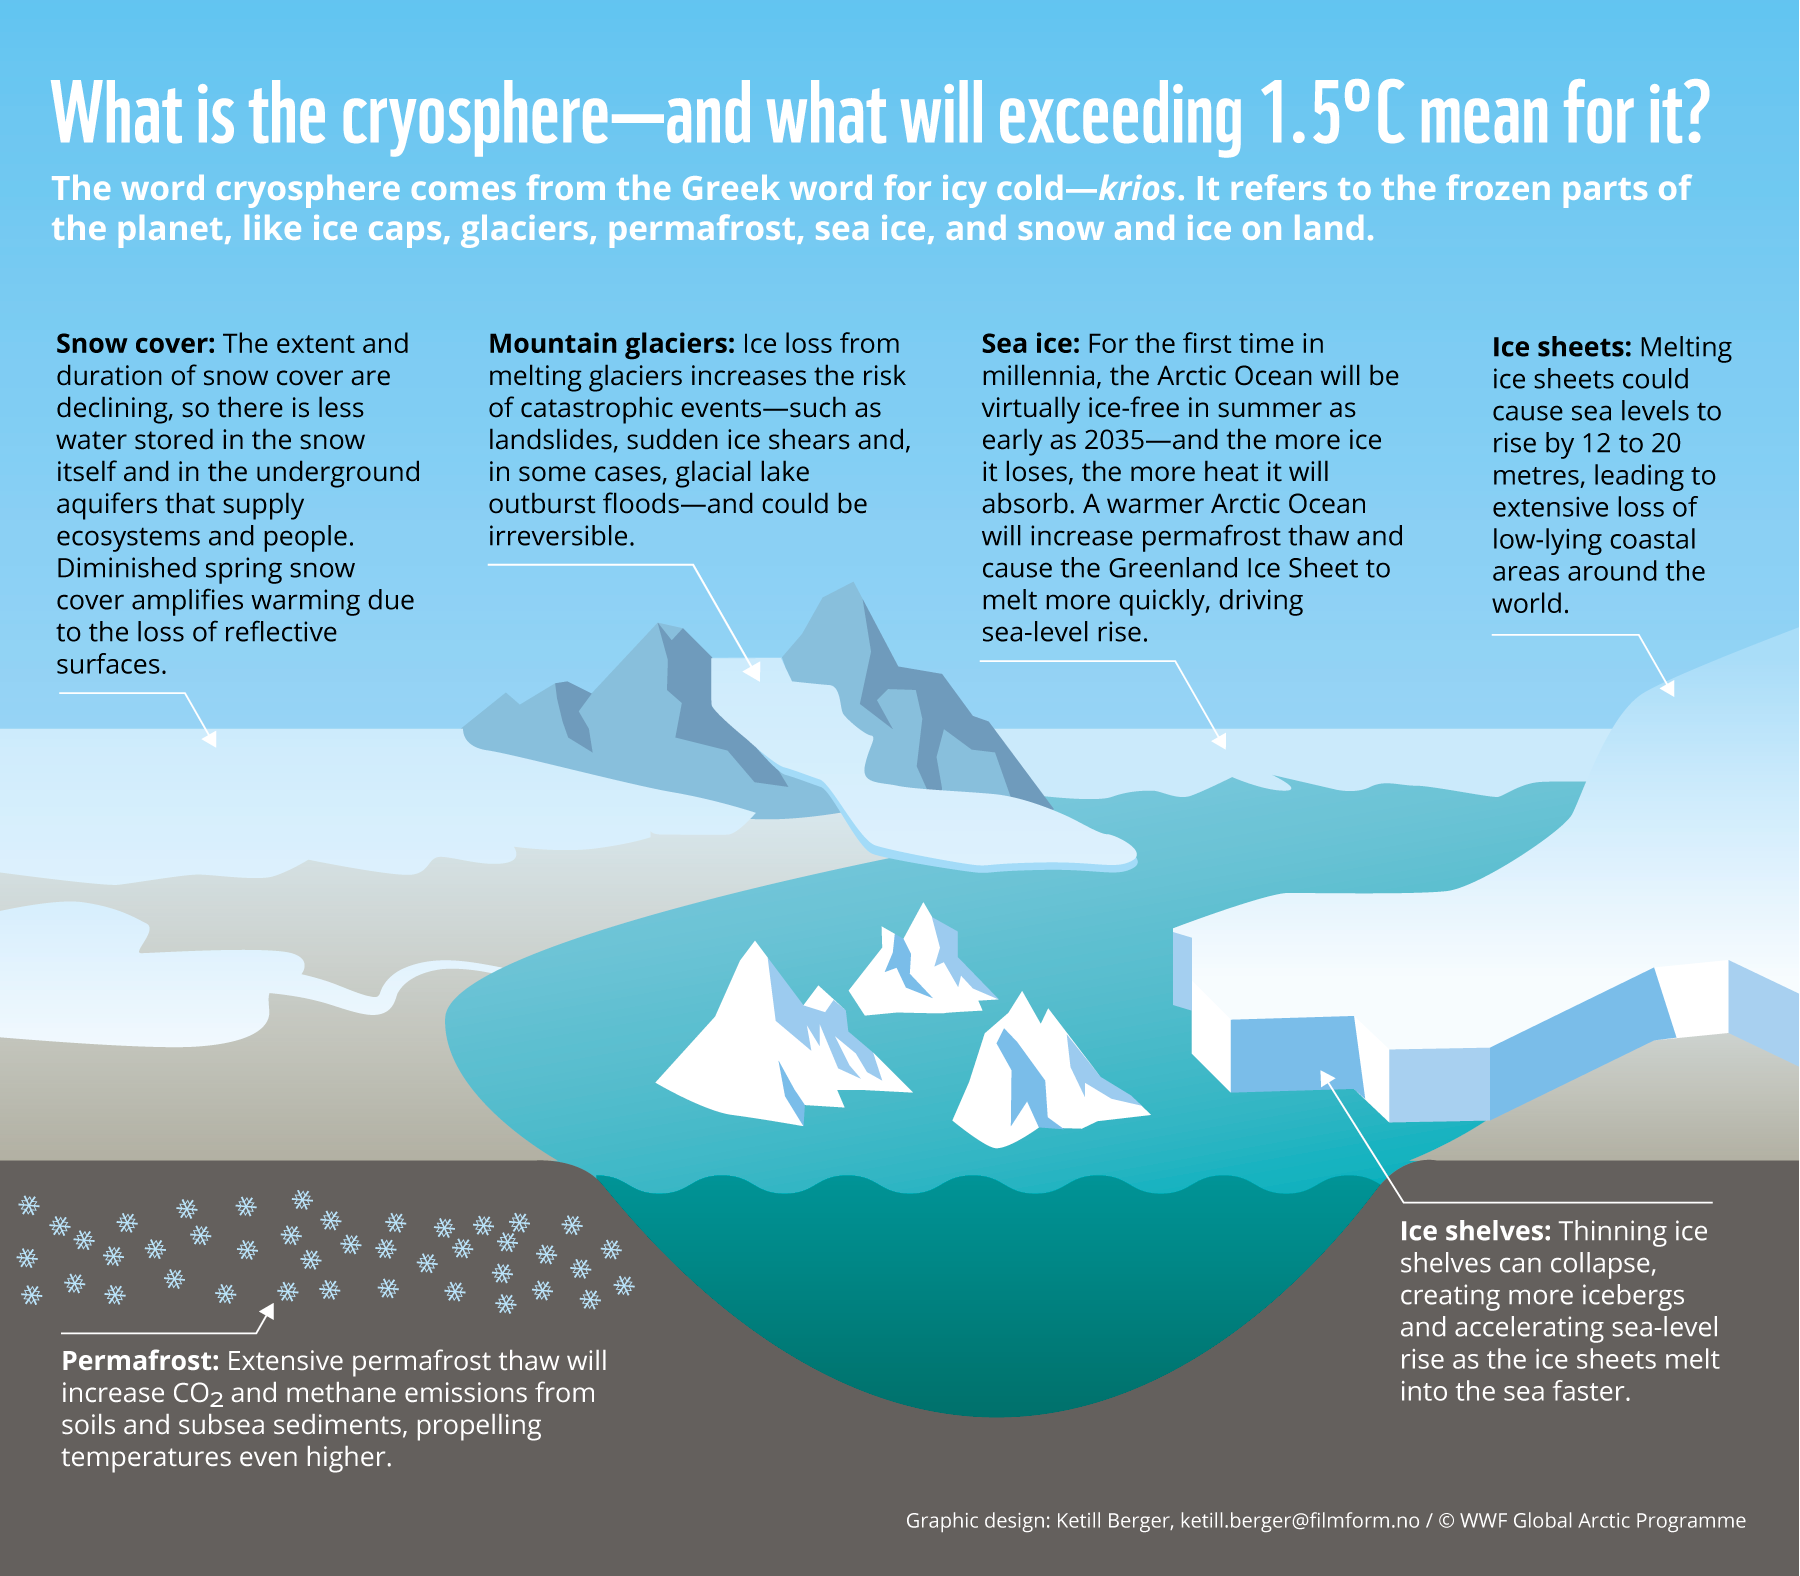 The word cryosphere comes from the Greek word for icy cold — krios. It refers to the frozen parts of the planet, like ice caps, glaciers, permafrost, sea ice, and snow and ice on land. <INSERT INFOGRAPHIC> Ice sheets: Melting ice sheets could cause sea levels to rise by 12 to 20 metres, leading to extensive loss of low-lying coastal areas around the world. Mountain glaciers: Ice loss from melting glaciers increases the risk of catastrophic events—such as landslides, sudden ice shears and, in some cases, glacial lake outburst floods—and could be irreversible. Sea ice: For the first time in millennia, the Arctic Ocean will be virtually ice-free in summer as early as 2035—and the more ice it loses, the more heat it will absorb. A warmer Arctic Ocean will increase permafrost thaw and cause the Greenland Ice Sheet to melt more quickly, driving sea-level rise. Permafrost: Extensive permafrost thaw will increase CO2 and methane emissions from soils and subsea sediments, propelling temperatures even higher. Ice shelves: Ice shelf thinning can lead to ice shelf collapse, creating more icebergs and accelerating sea-level rise by causing more ice from ice sheets to melt into the sea faster. Snow cover: The extent and duration of snow cover are declining, so there is less water stored in the snow itself and in the underground aquifers that supply ecosystems and people. Diminished spring snow cover amplifies warming due to the loss of reflective surfaces. Graphic design: Ketill Berger / © WWF Global Arctic Programme